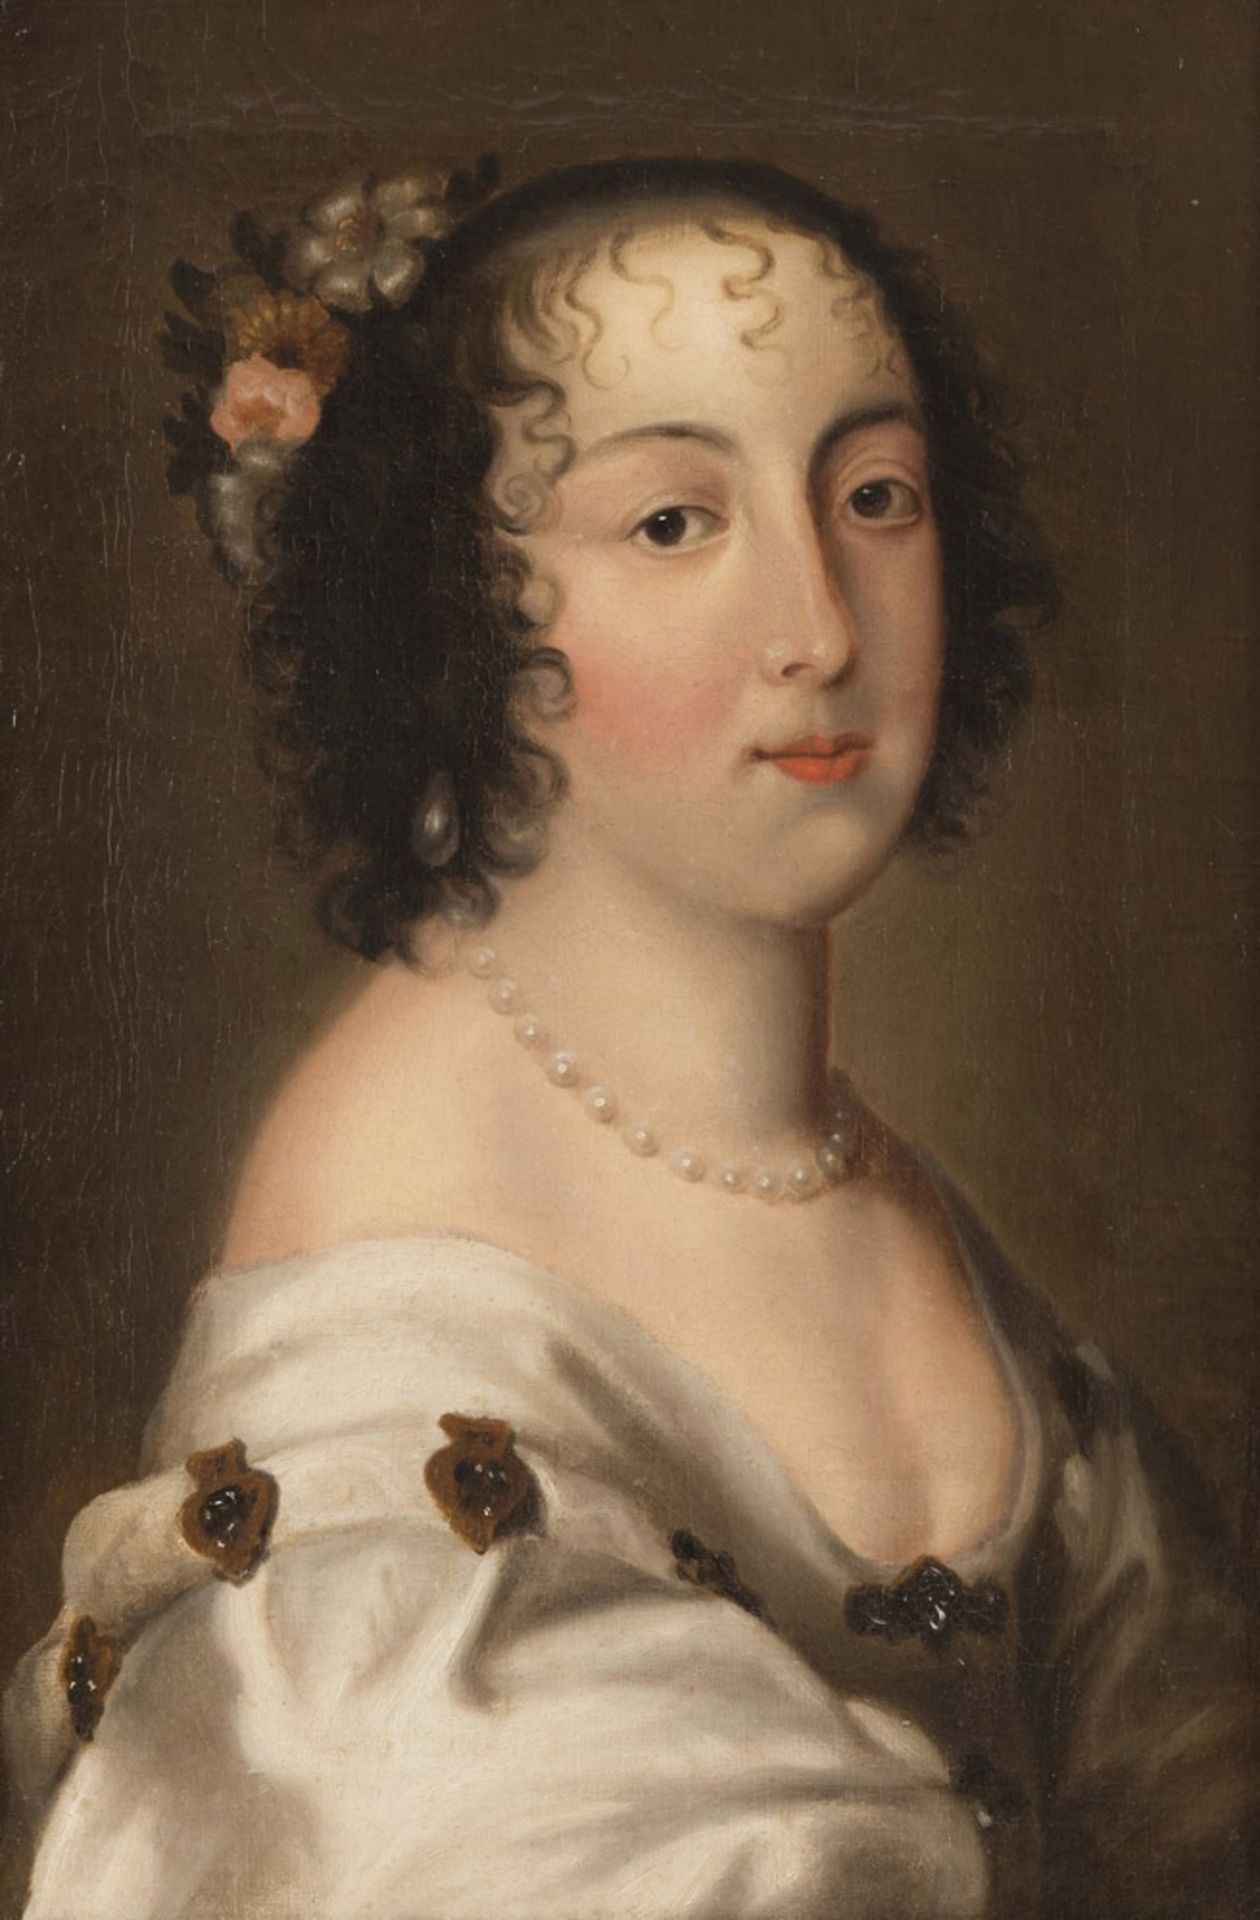 ENGLISH PAINTER, LATE 18TH CENTURY PORTRAIT OF A NOBLEWOMAN WITH PEARLS AND FLOWERS, AFTER PETER